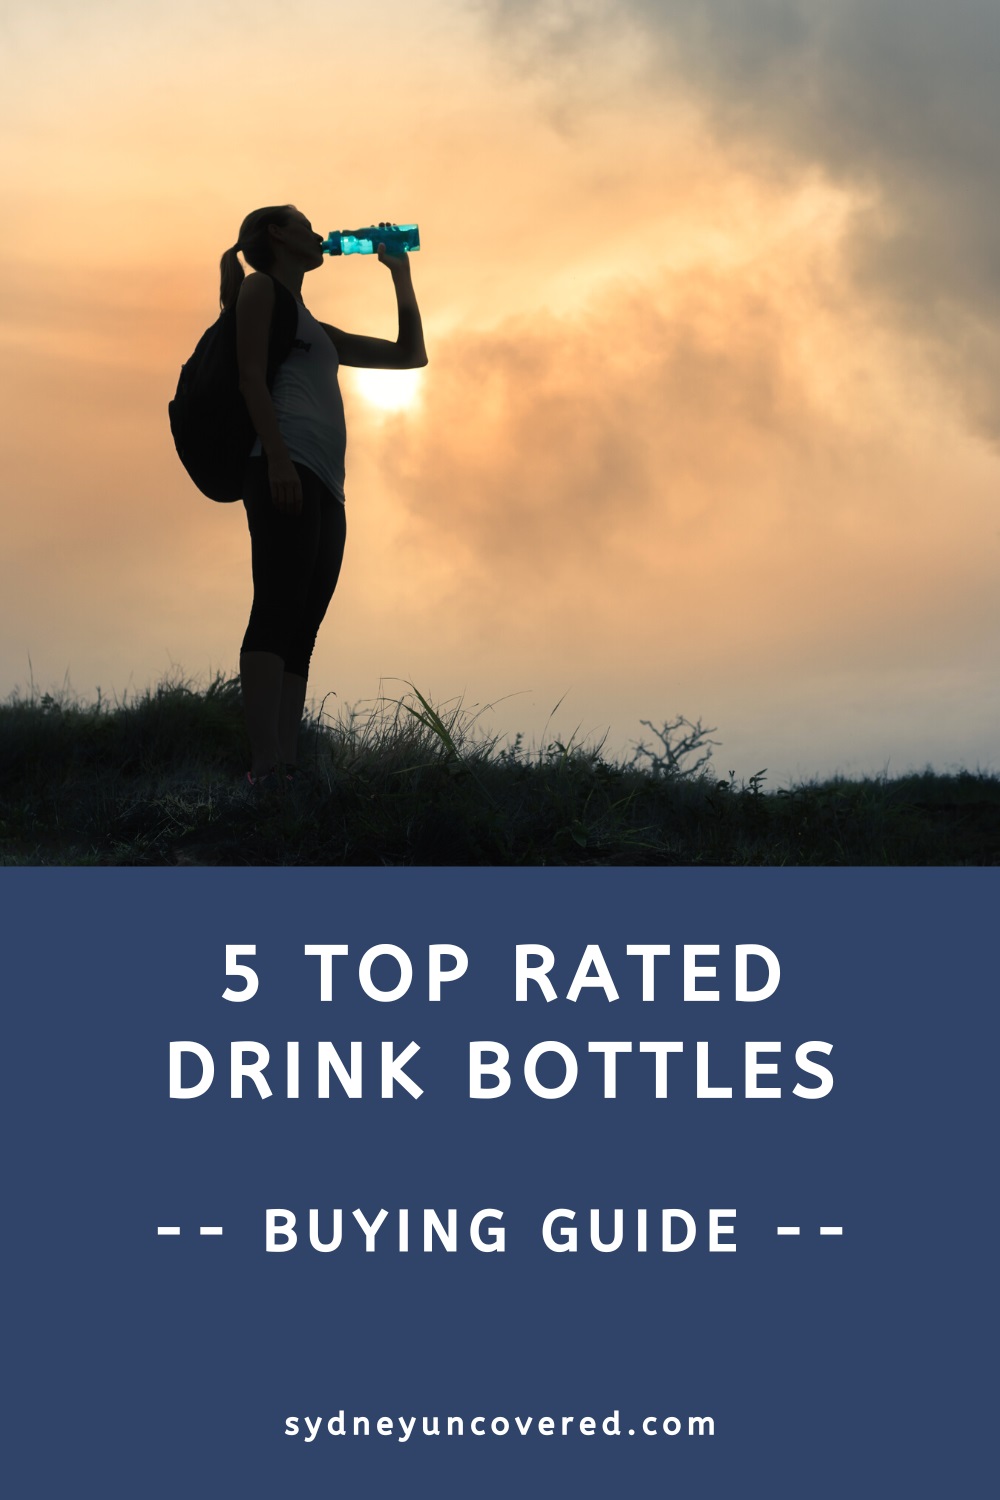 5 Top rated drink bottles (buying guide)